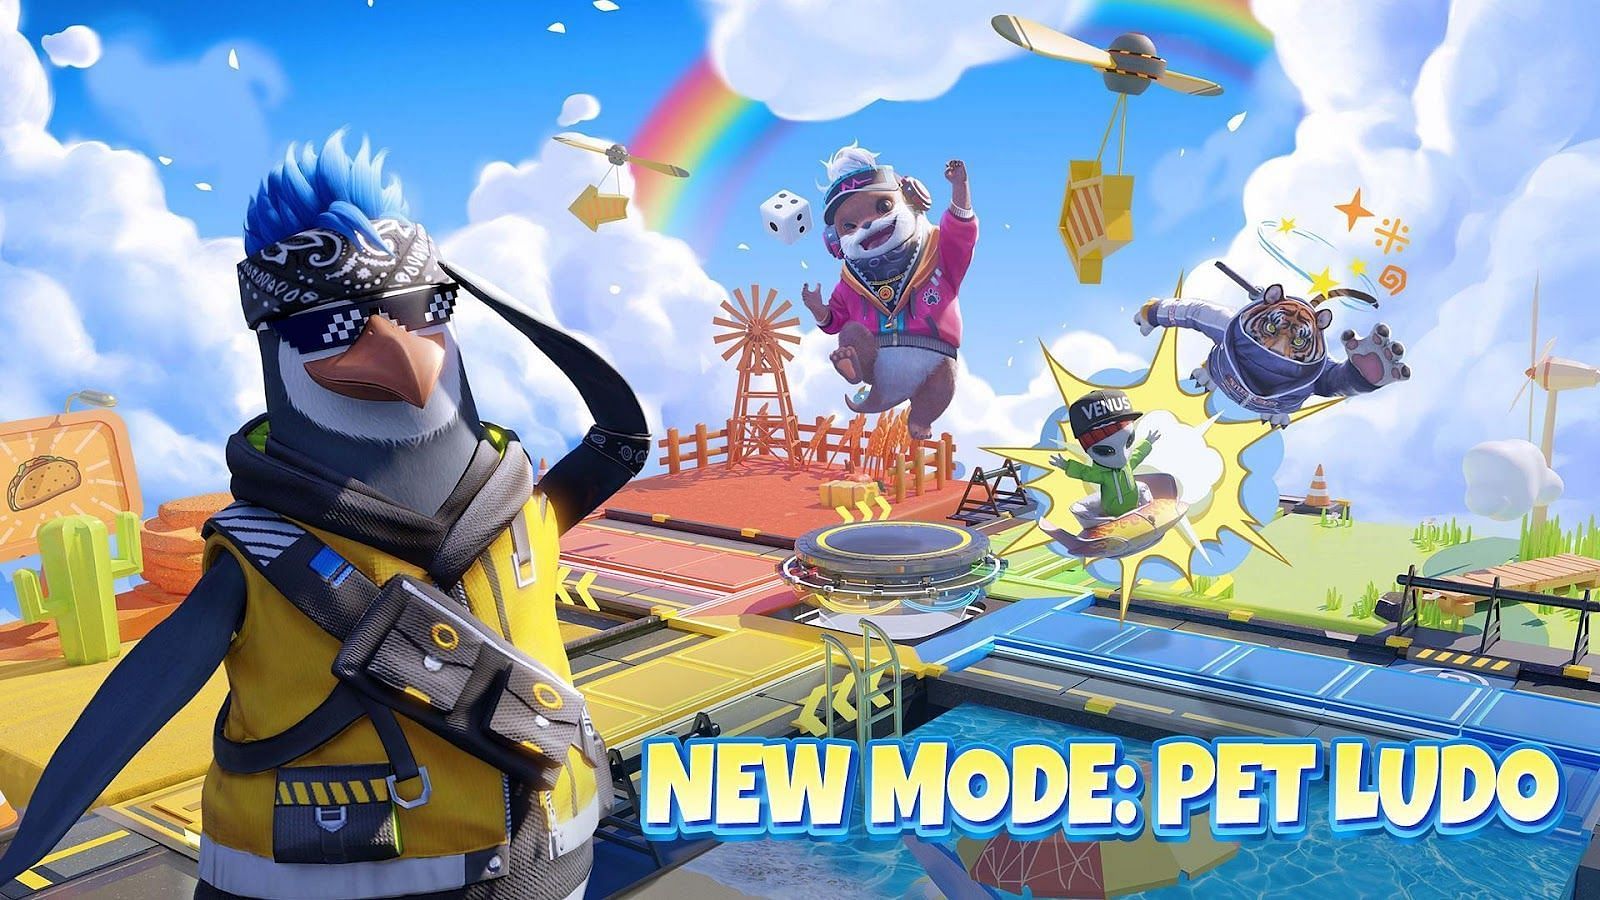 New Mode: Pet Ludo anchored by four of Free Fire&rsquo;s favorite pets &ndash; Mr. Waggor, Moony, Sensei Tig, and Ottero